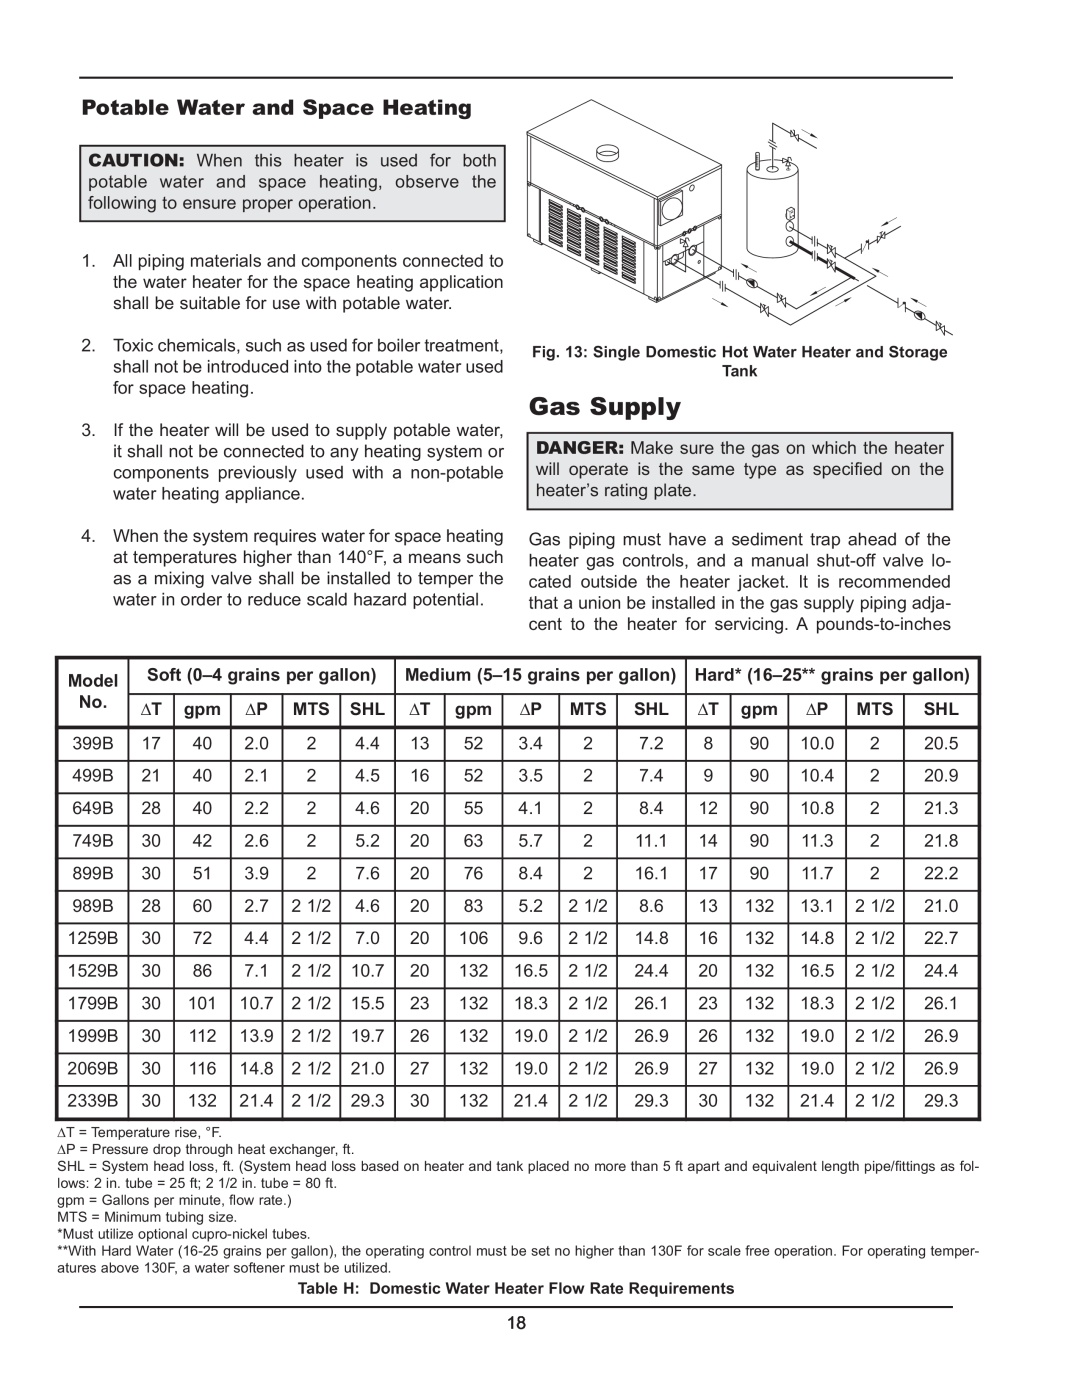 Raypak 399B-2339B operating instructions Gas Supply, Potable Water and Space Heating 